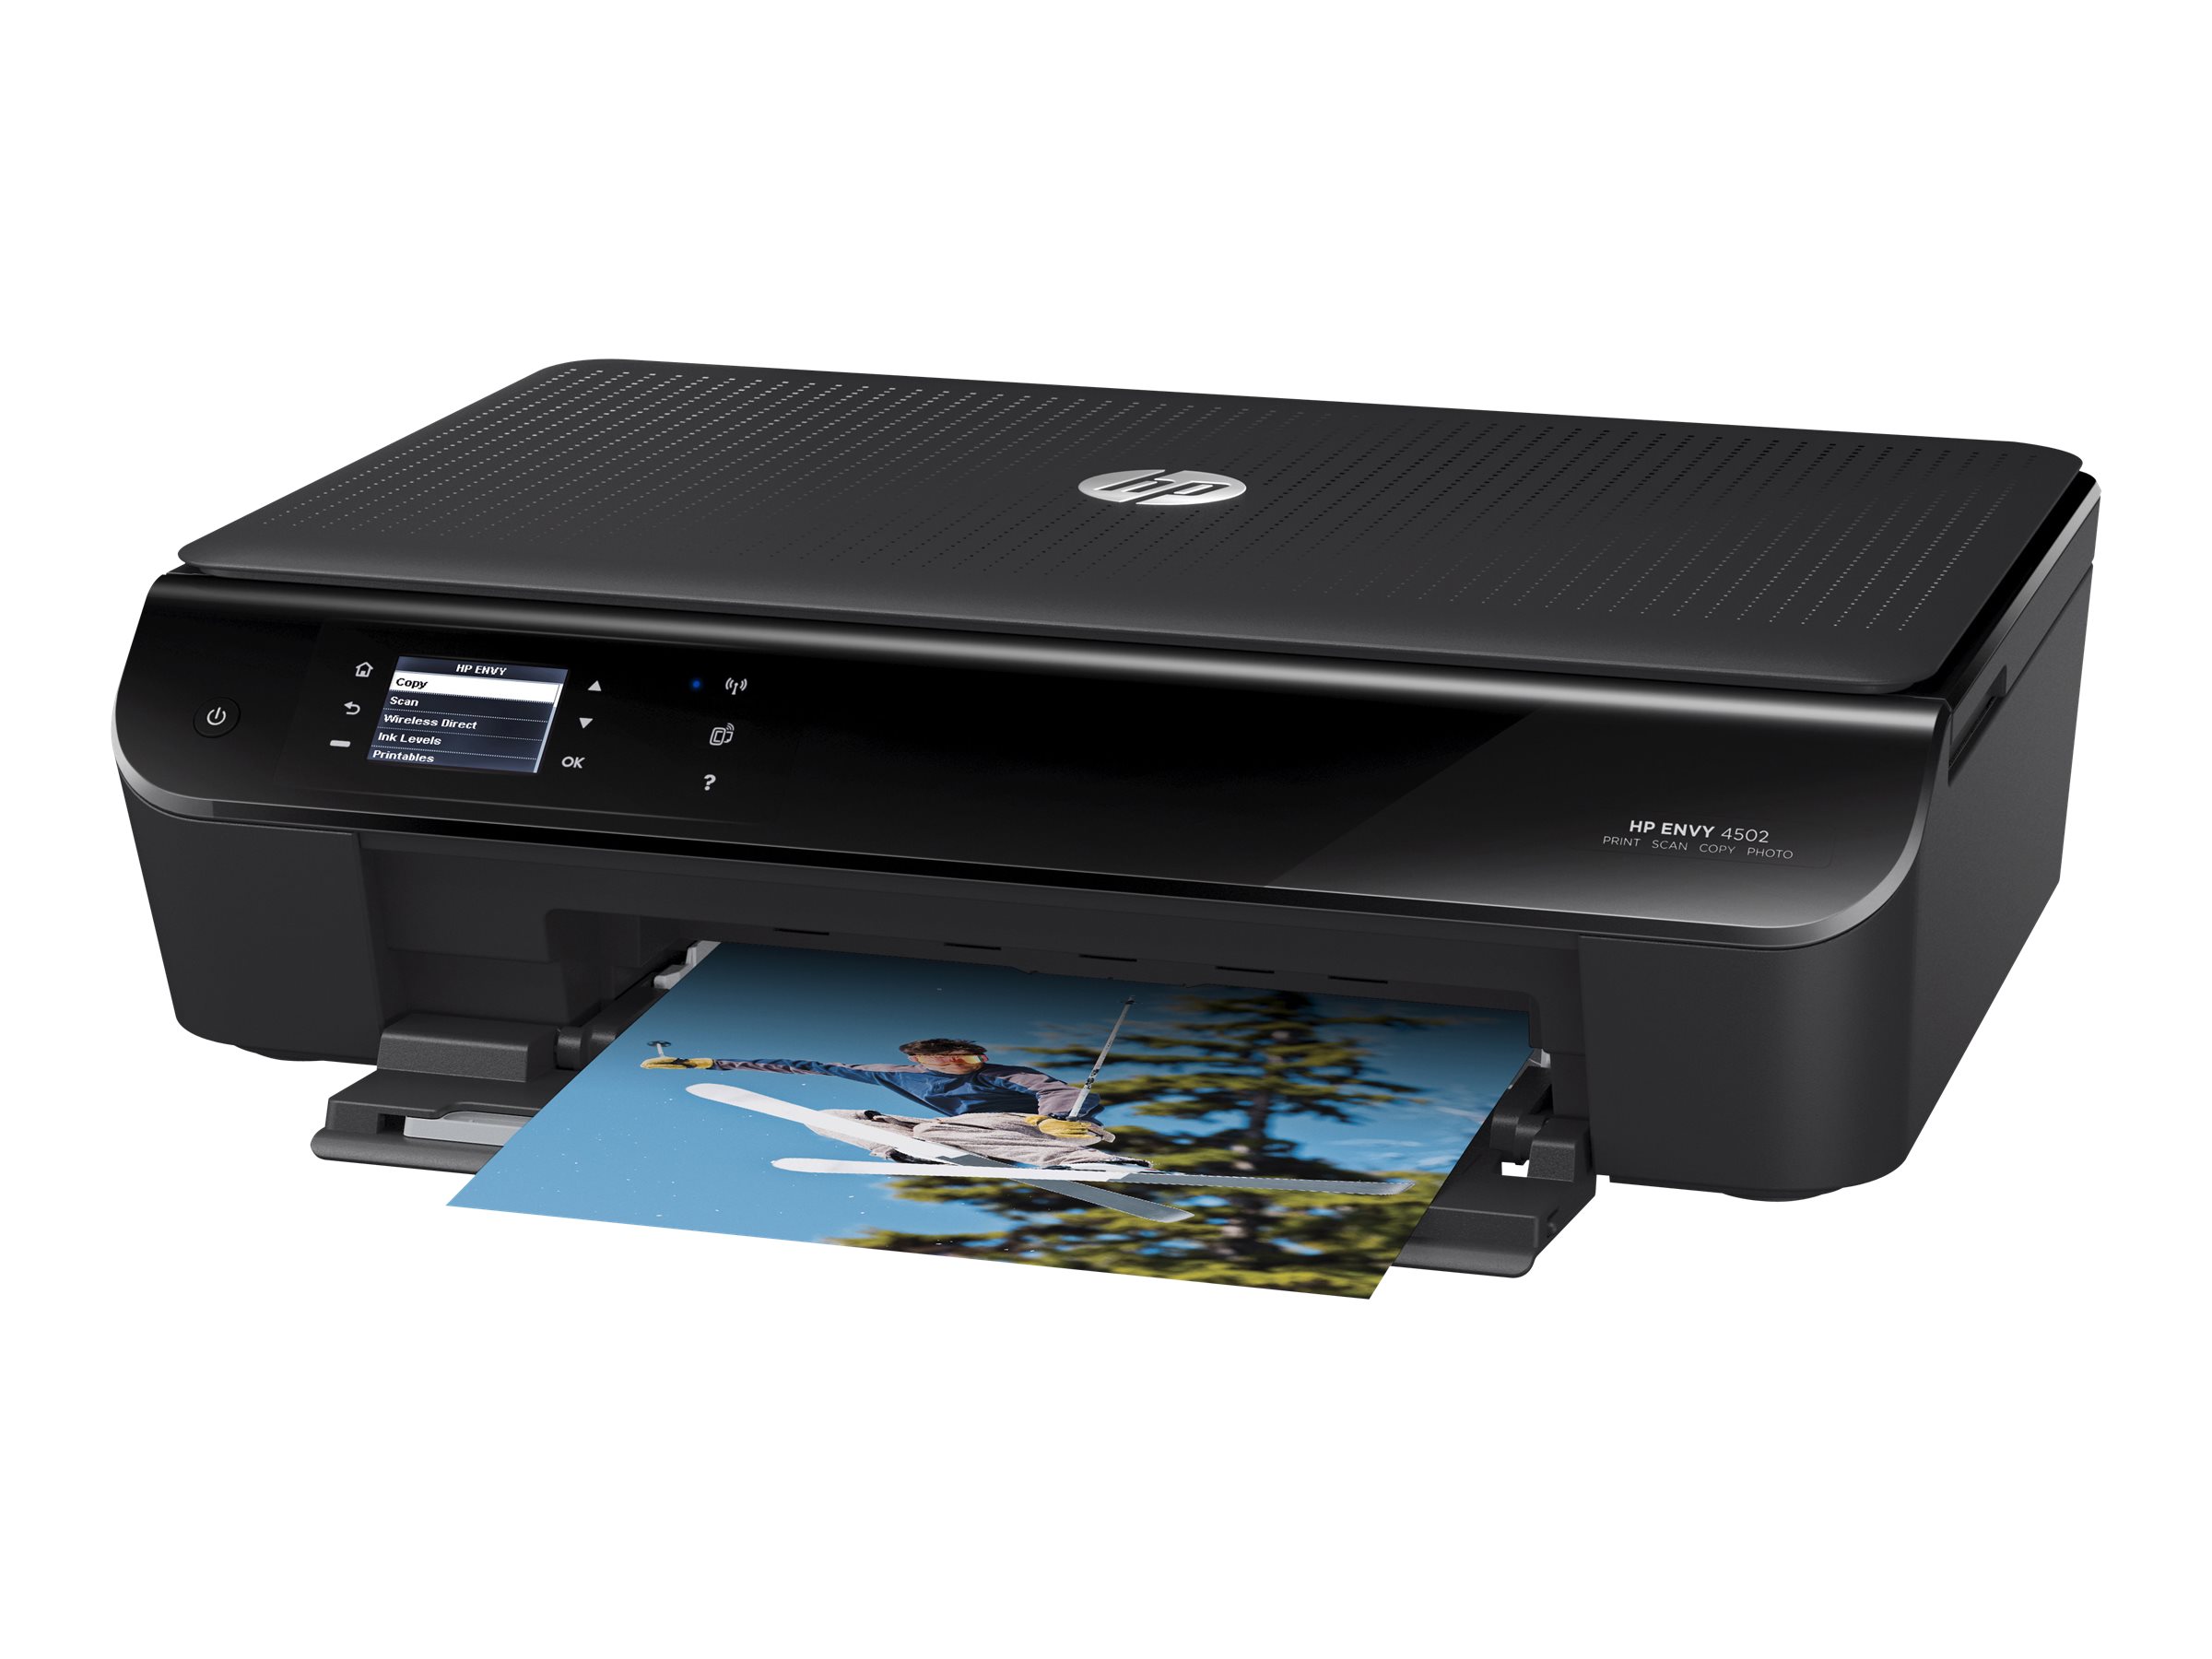 HP ENVY 4502 e-All-in-One - Multifunction printer - color - ink-jet - Legal (8.5 in x 14 in)/A4 (8.25 in x 11.7 in) (original) - A4/Legal (media) - up to 6 ppm (copying) - up to 8.8 ppm (printing) - 100 sheets - USB 2.0, Wi-Fi(n) - image 1 of 5